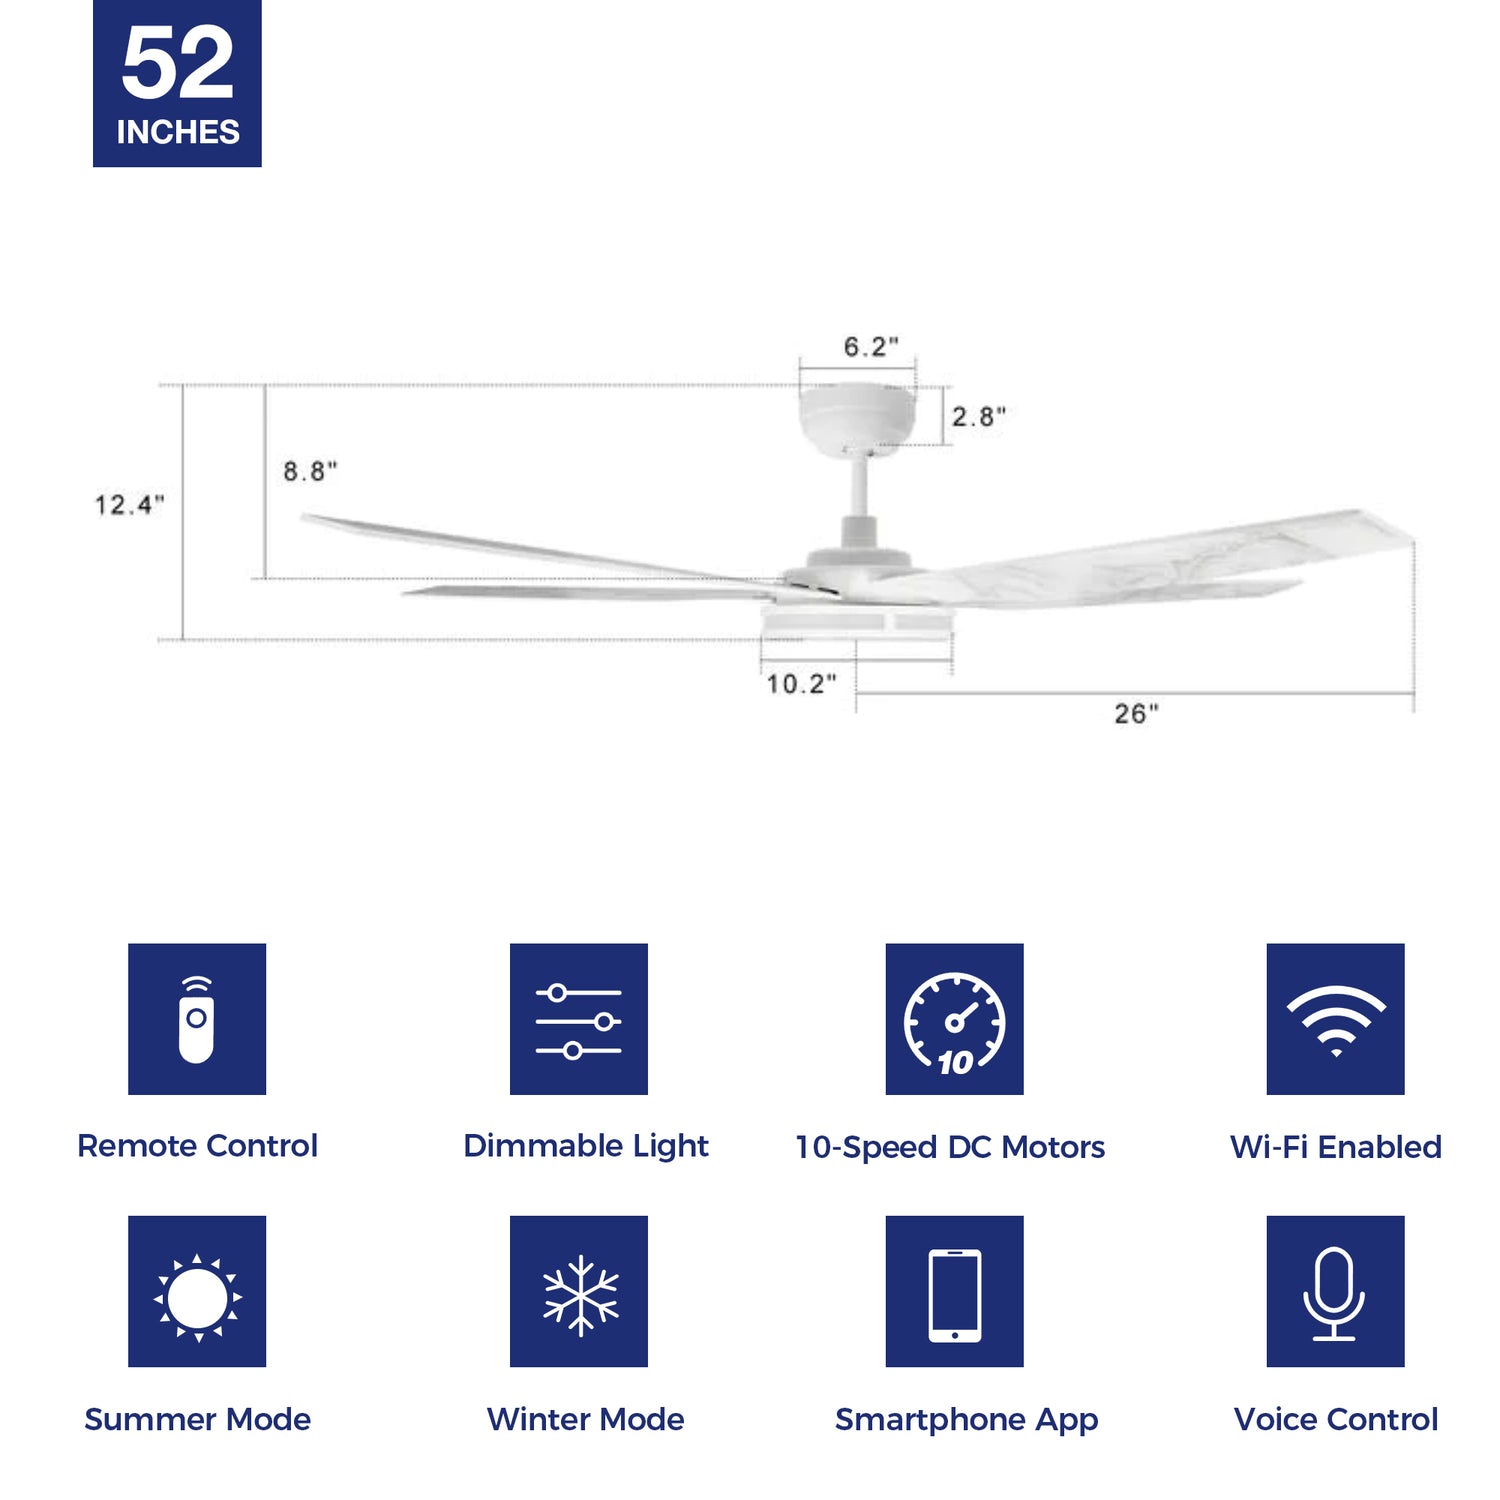 Explorer Outdoor 52&quot; Smart Ceiling Fan with LED Light Kit in dinning room,kitchen,bedroom and living room-unit size.The fan features Remote control, Wi-Fi apps and Voice control technology (compatible with Amazon Alexa and Google Home Assistant ) to set fan preferences. 